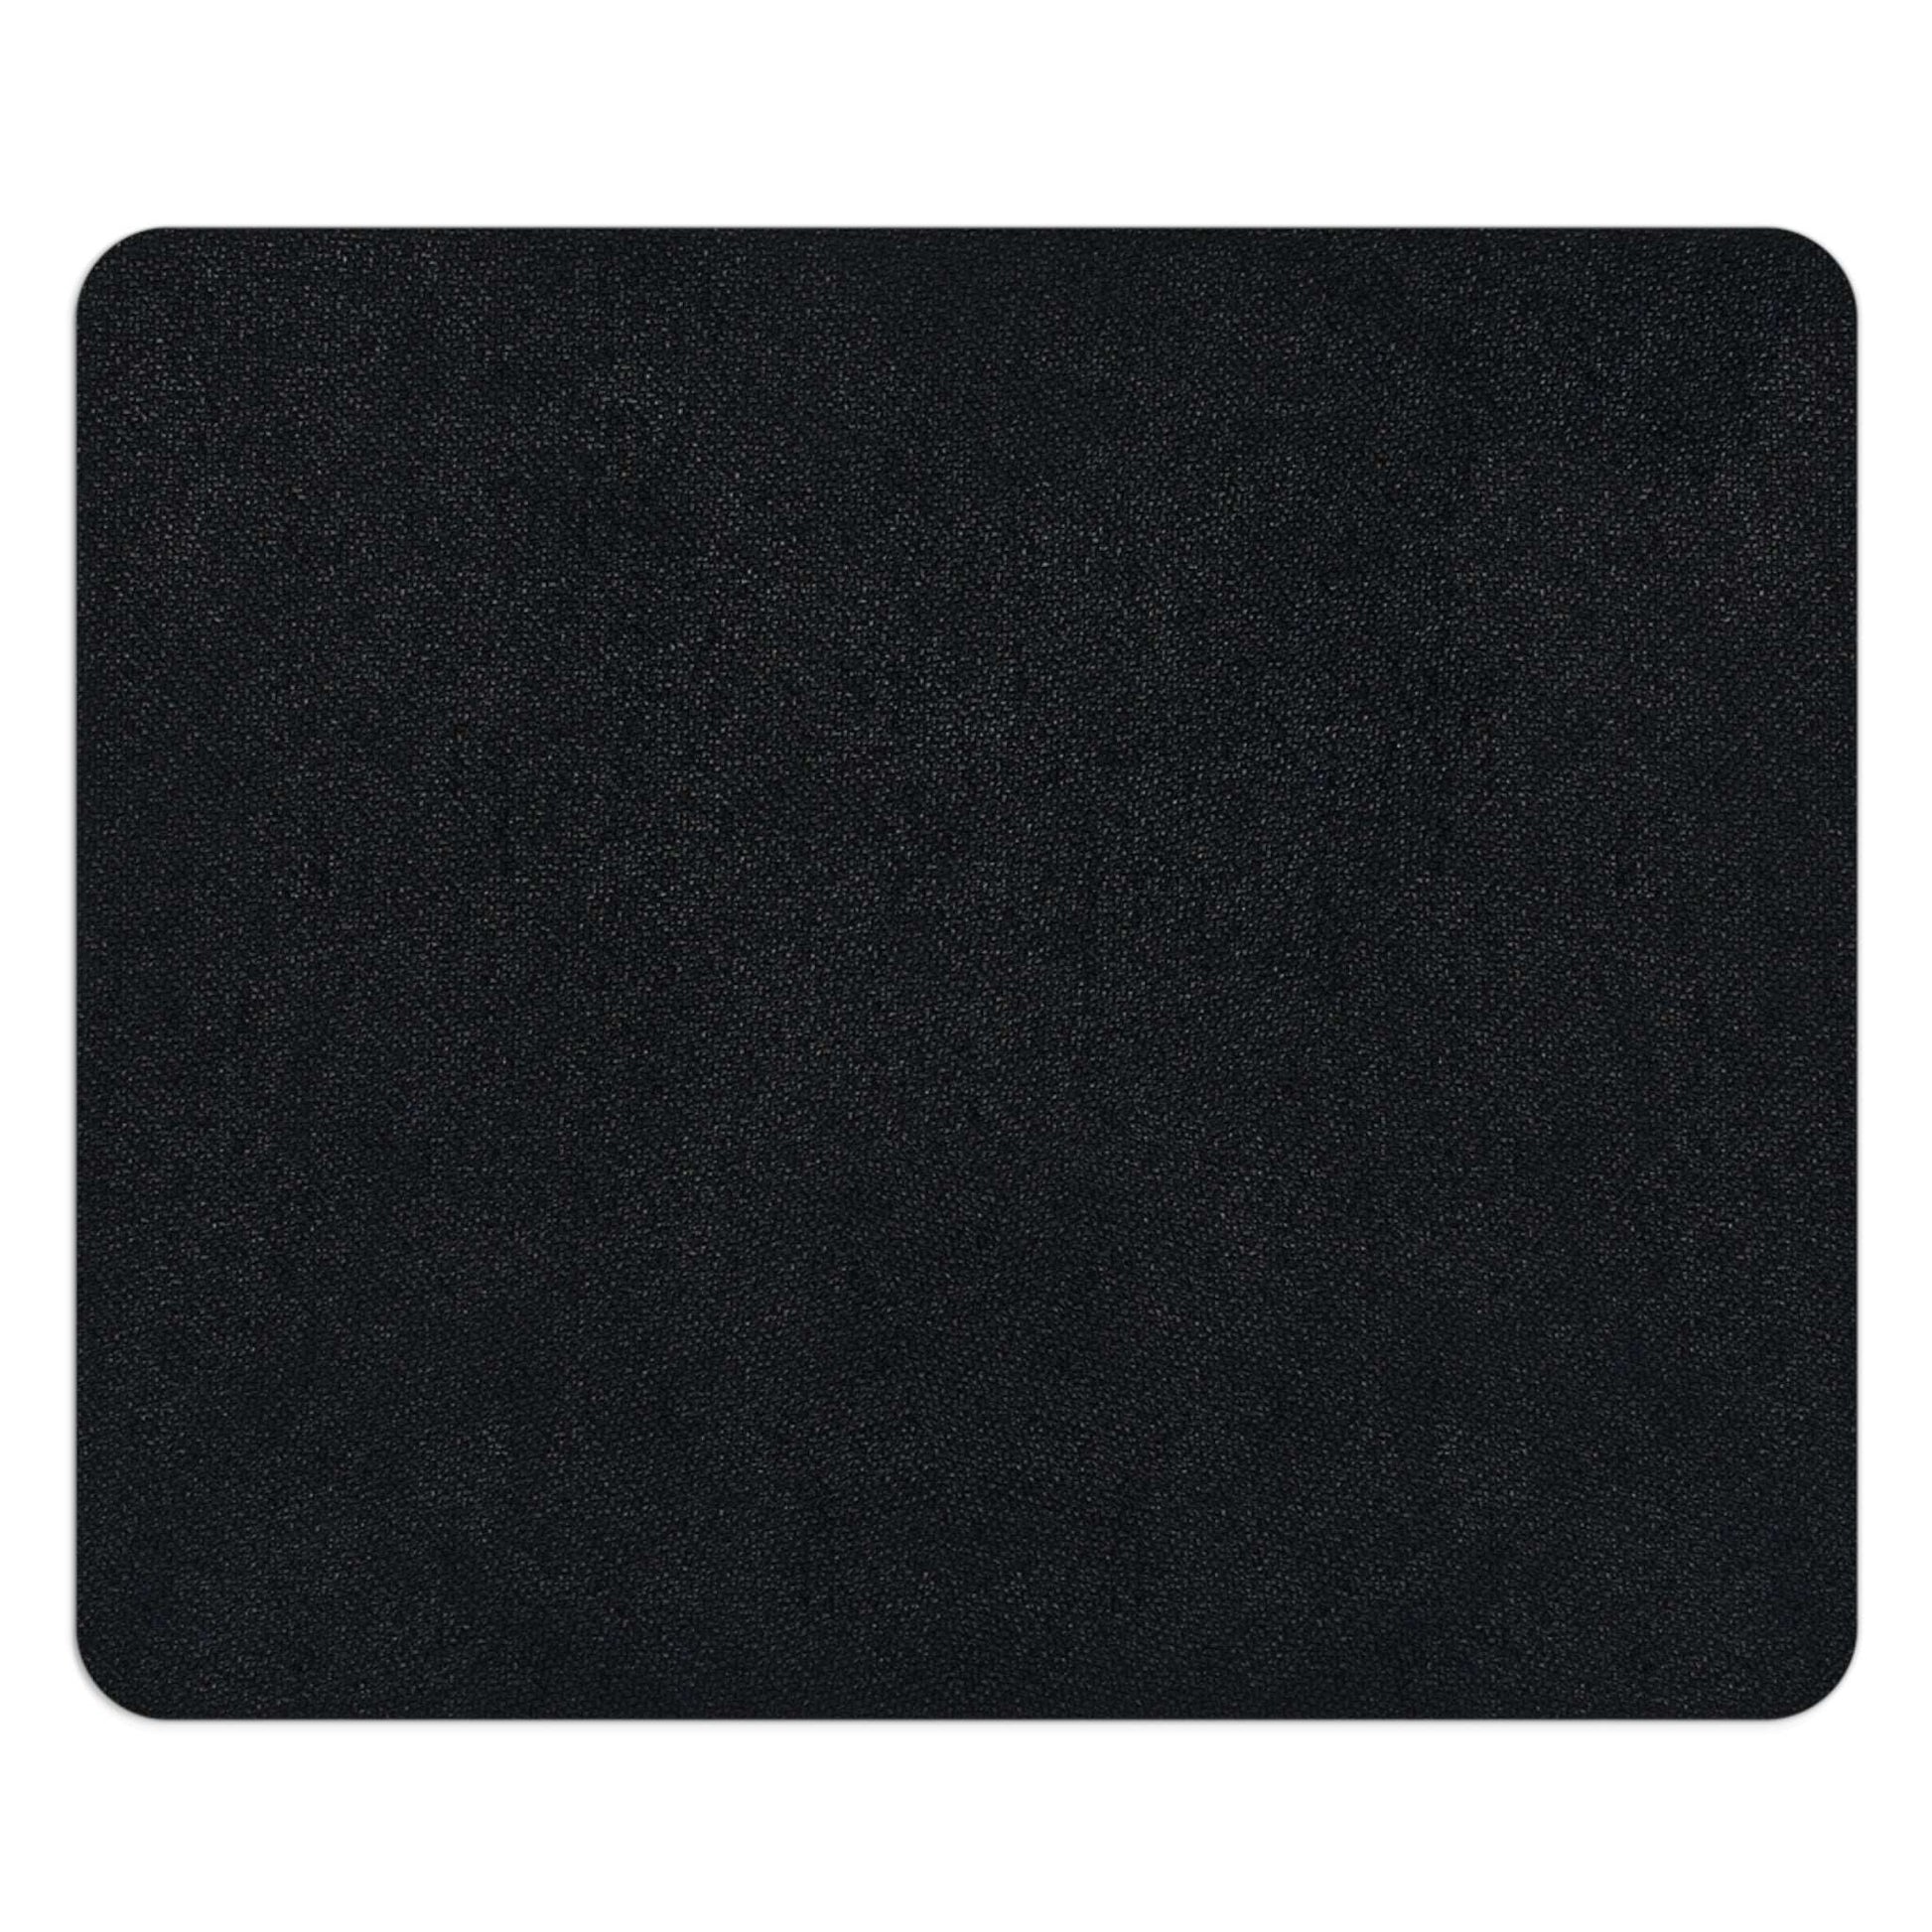 Computer Mouse Pad, Non-slip rubber bottom, Watercolor Flowers